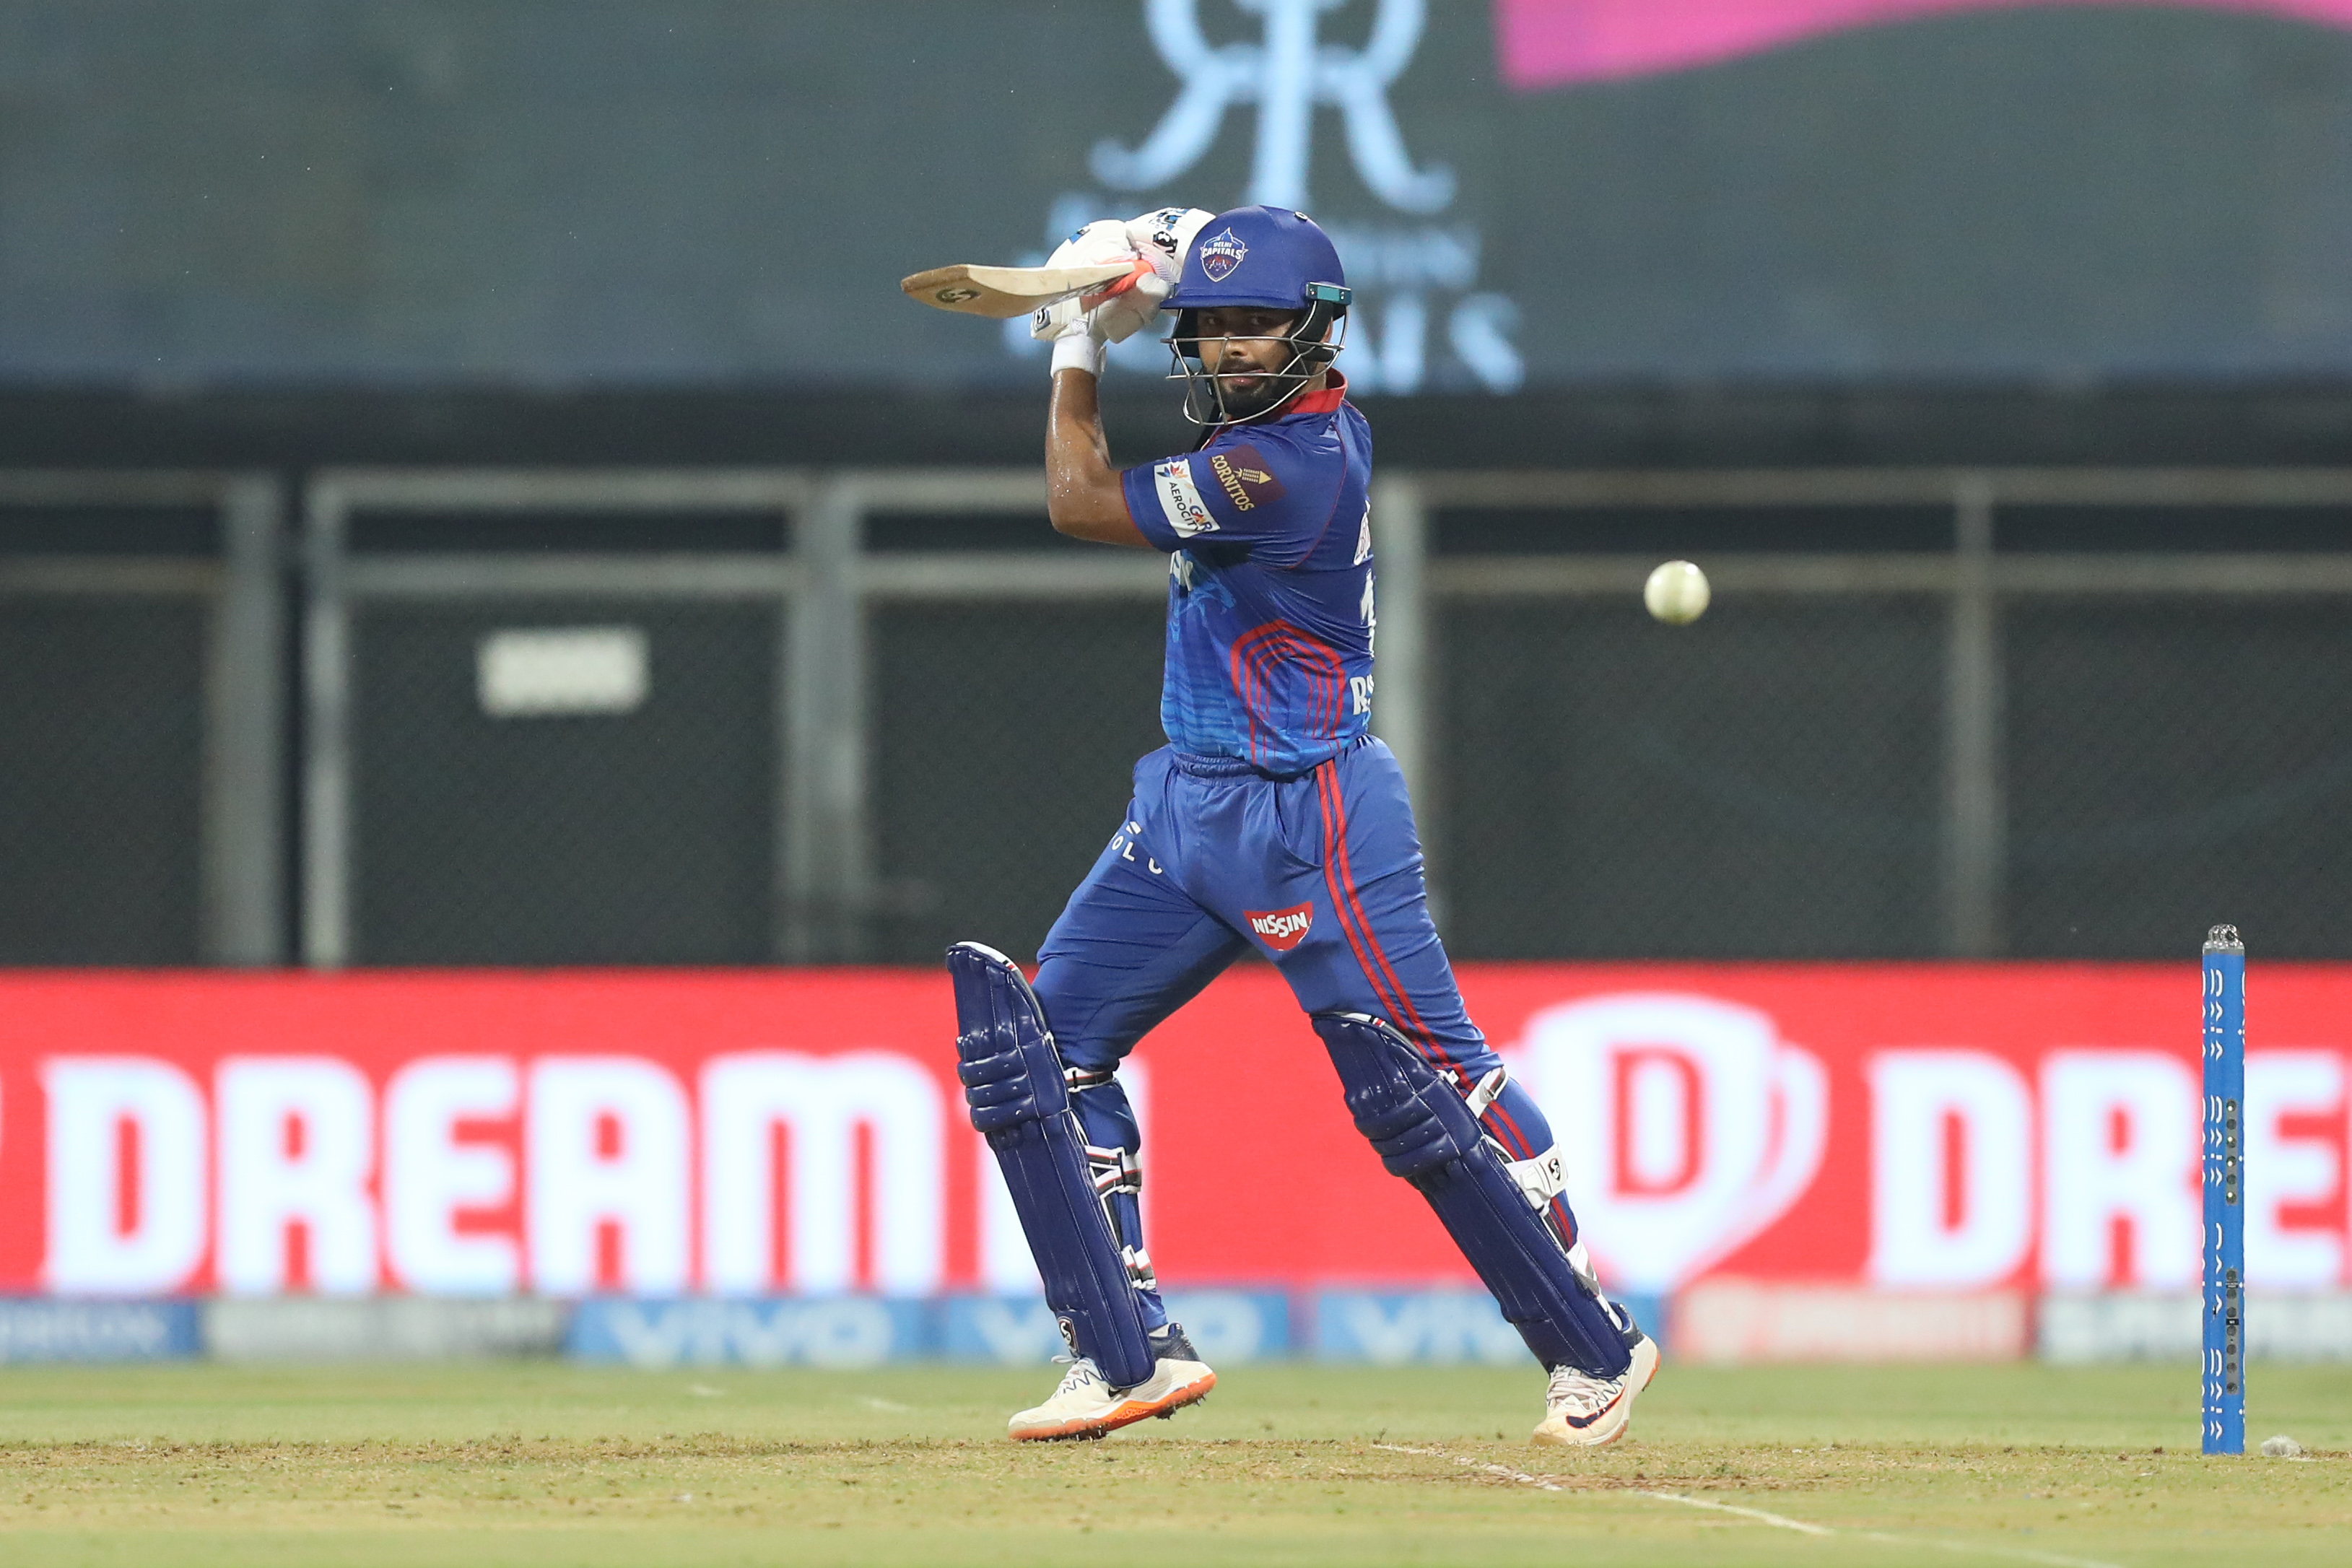 Rishabh Pant made a fifty for DC | IPL/BCCI